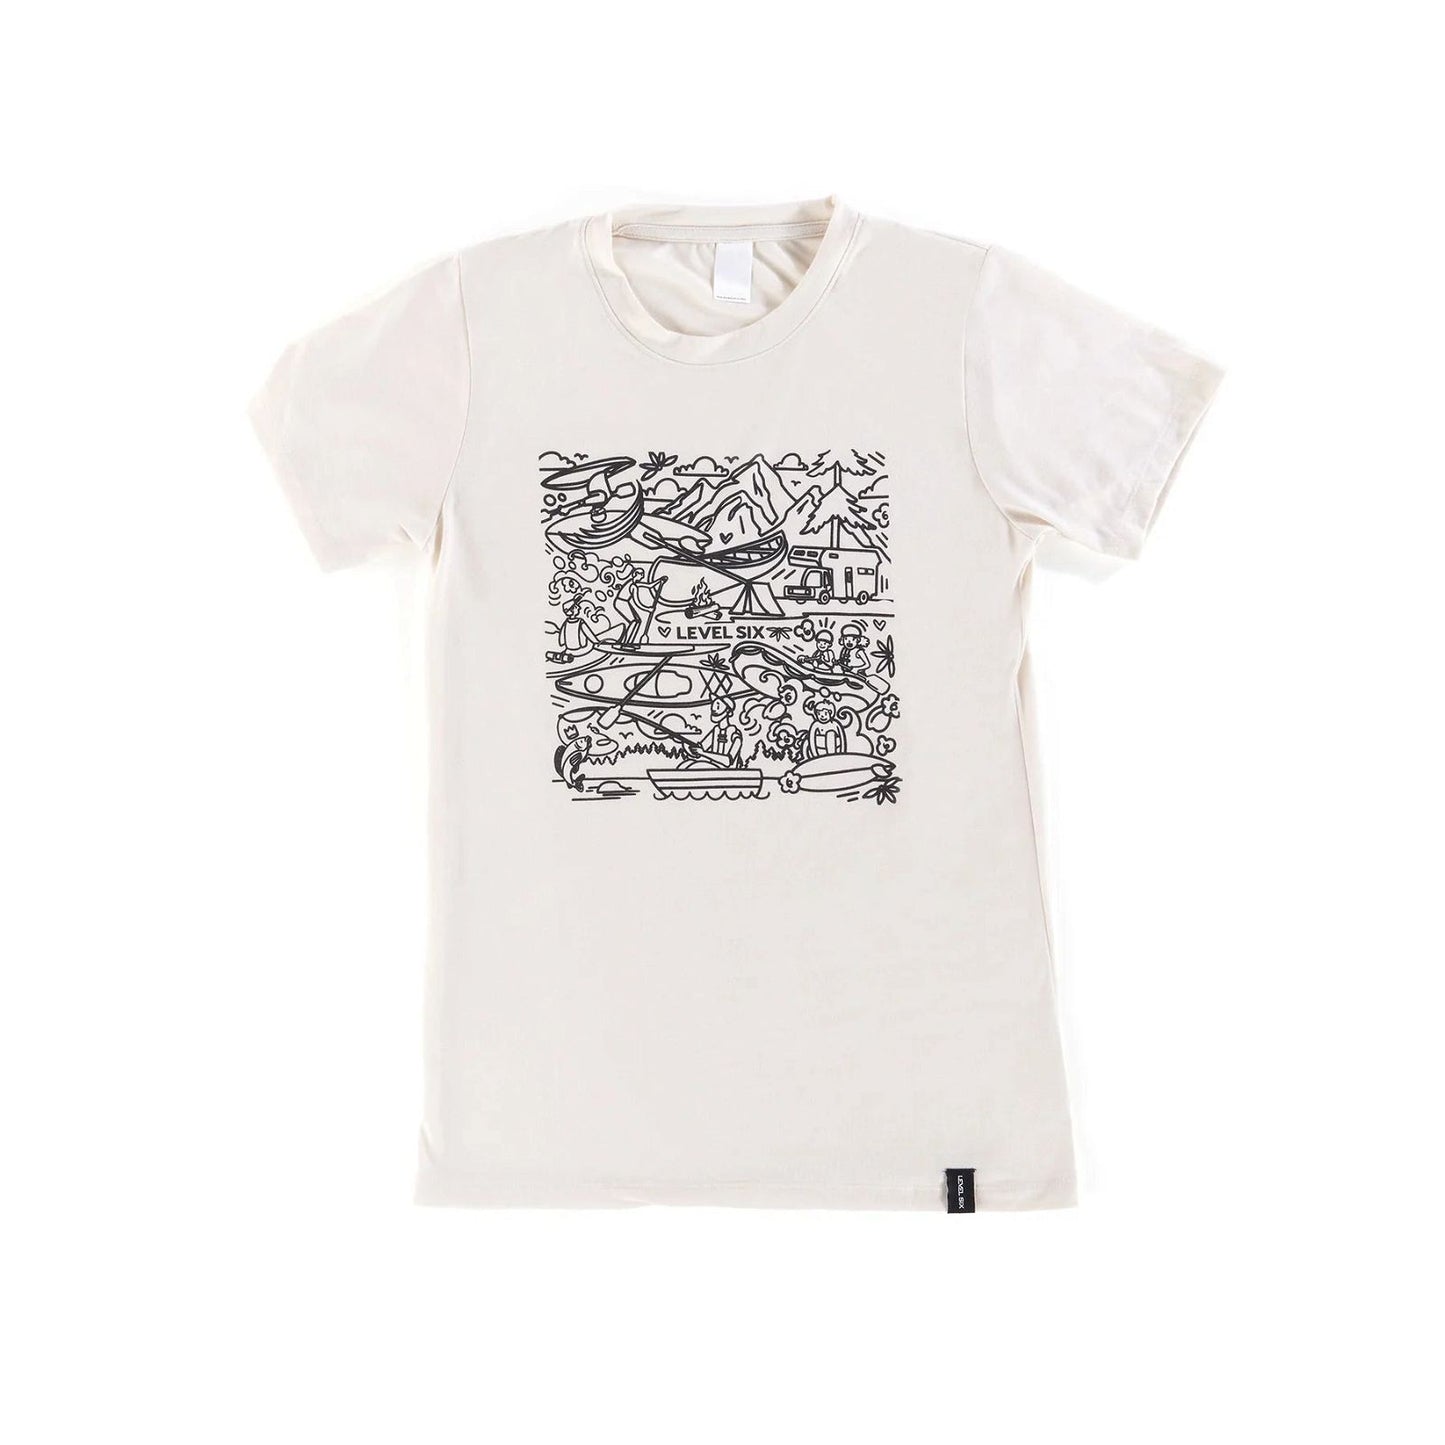   BCO Graffiti Tee  BestCoast Outfitters 